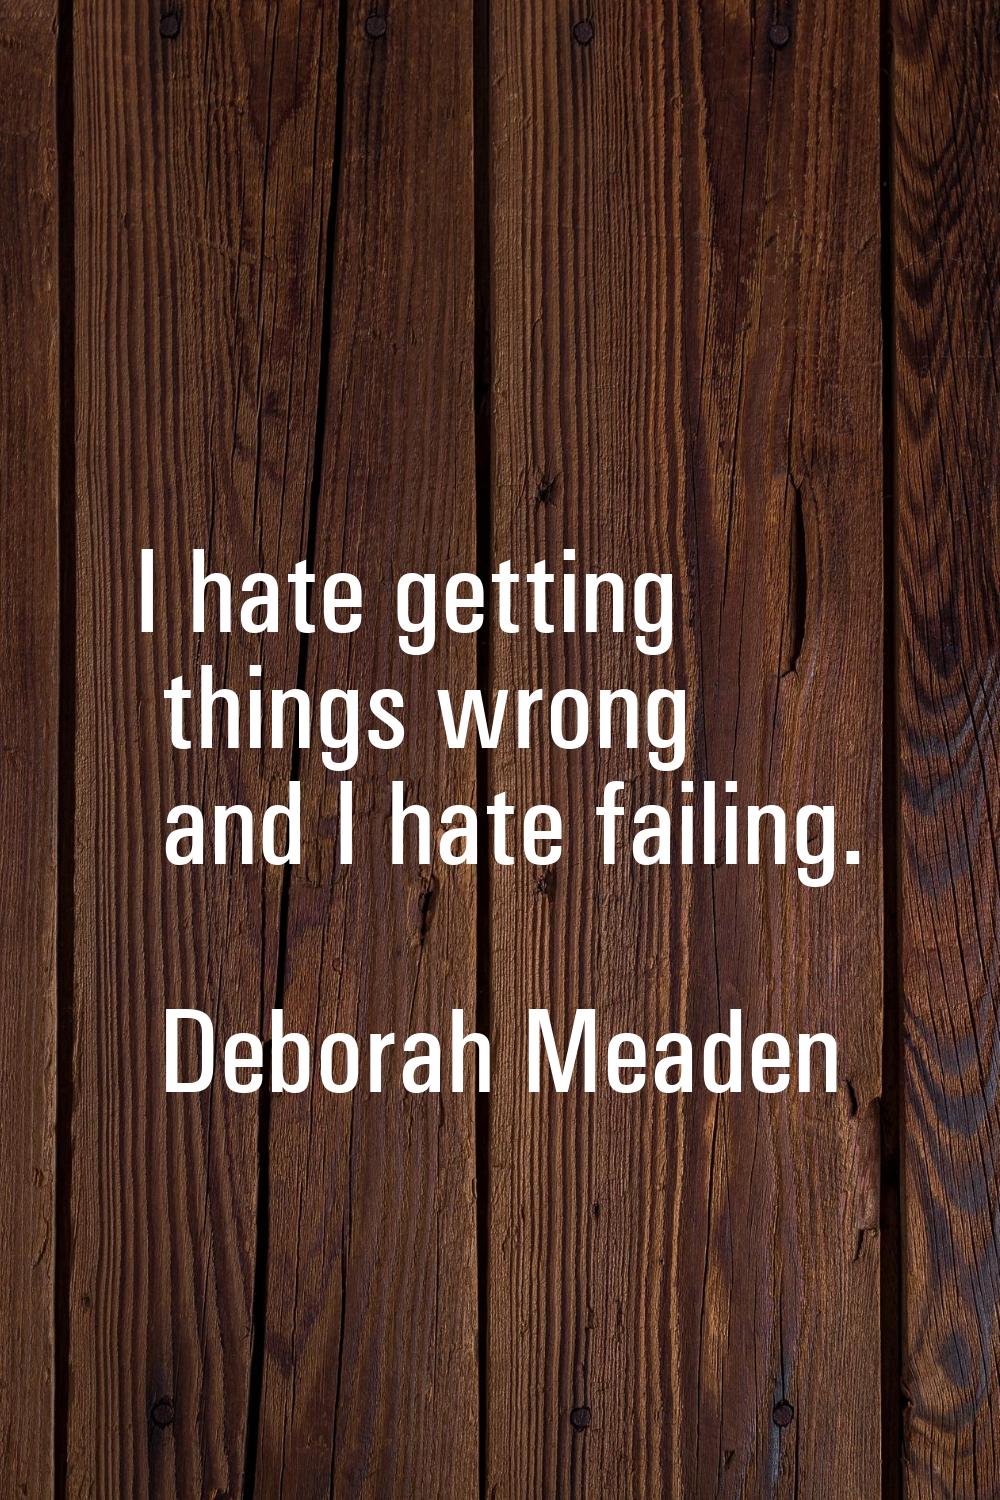 I hate getting things wrong and I hate failing.